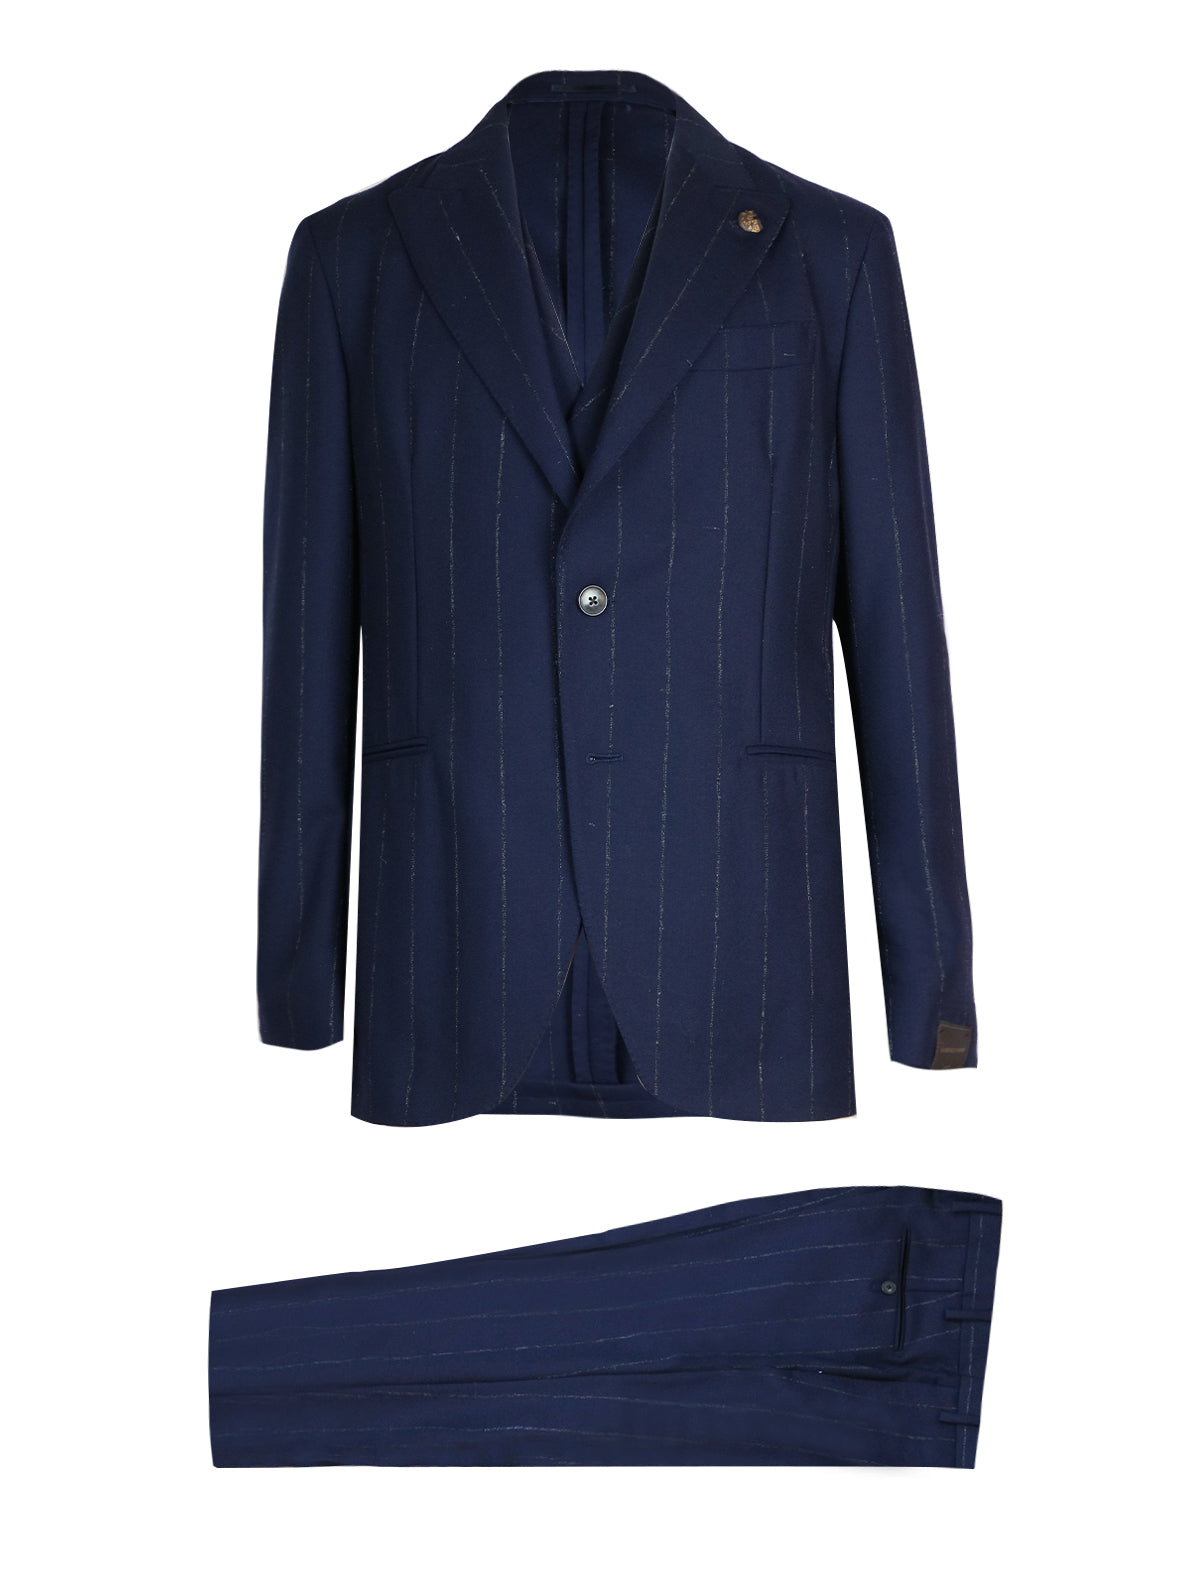 Gabriele Pasini Single-Breasted 3-Piece Suit Set in Navy Pinstripes